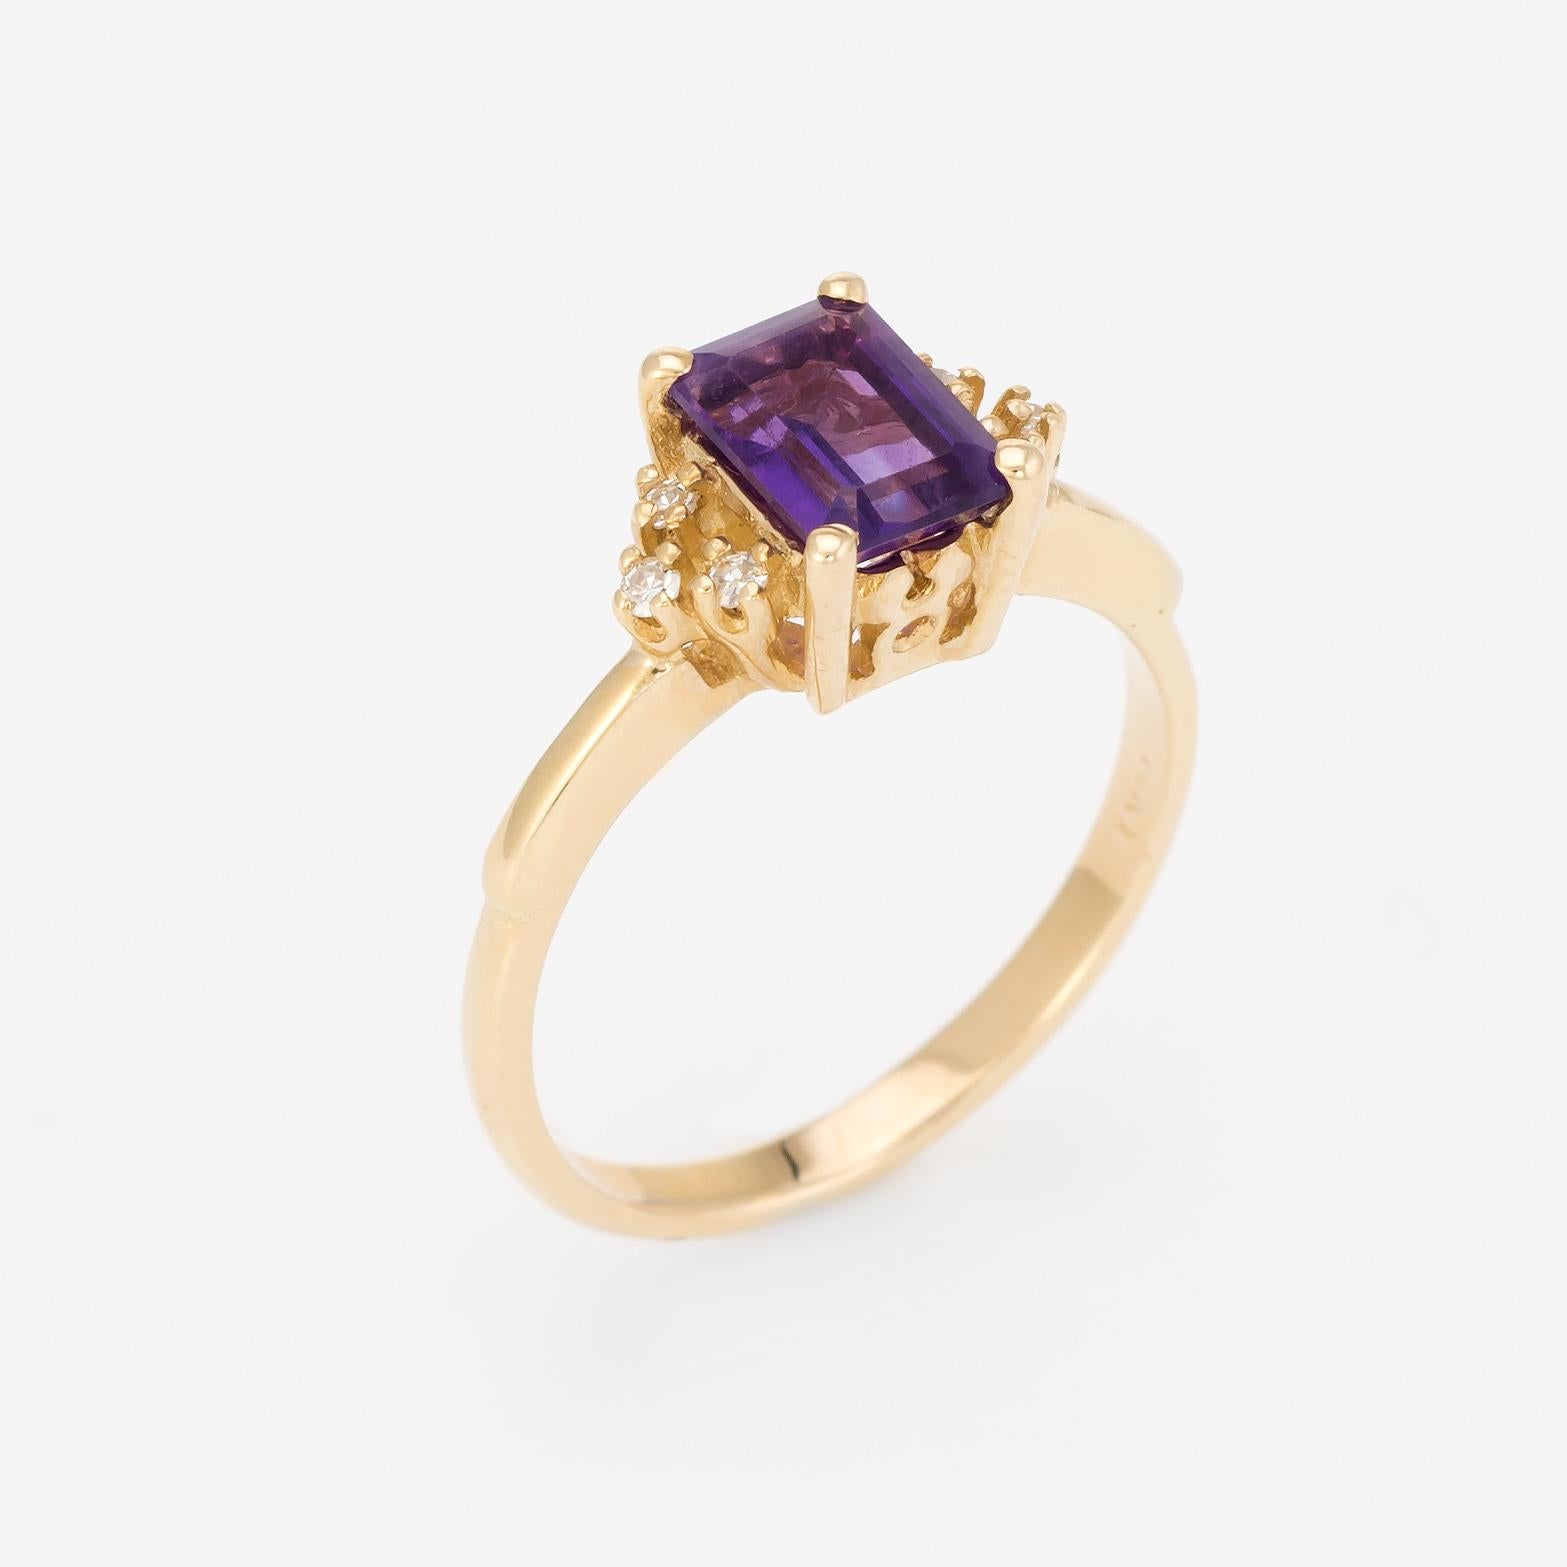 Finely detailed vintage amethyst & diamond cocktail ring, crafted in 14 karat yellow gold. 

Centrally mounted emerald cut amethyst measures 7mm x 5mm (estimated at 1 carat), accented with six estimated 0.01 carat single cut diamonds (0.06 carats